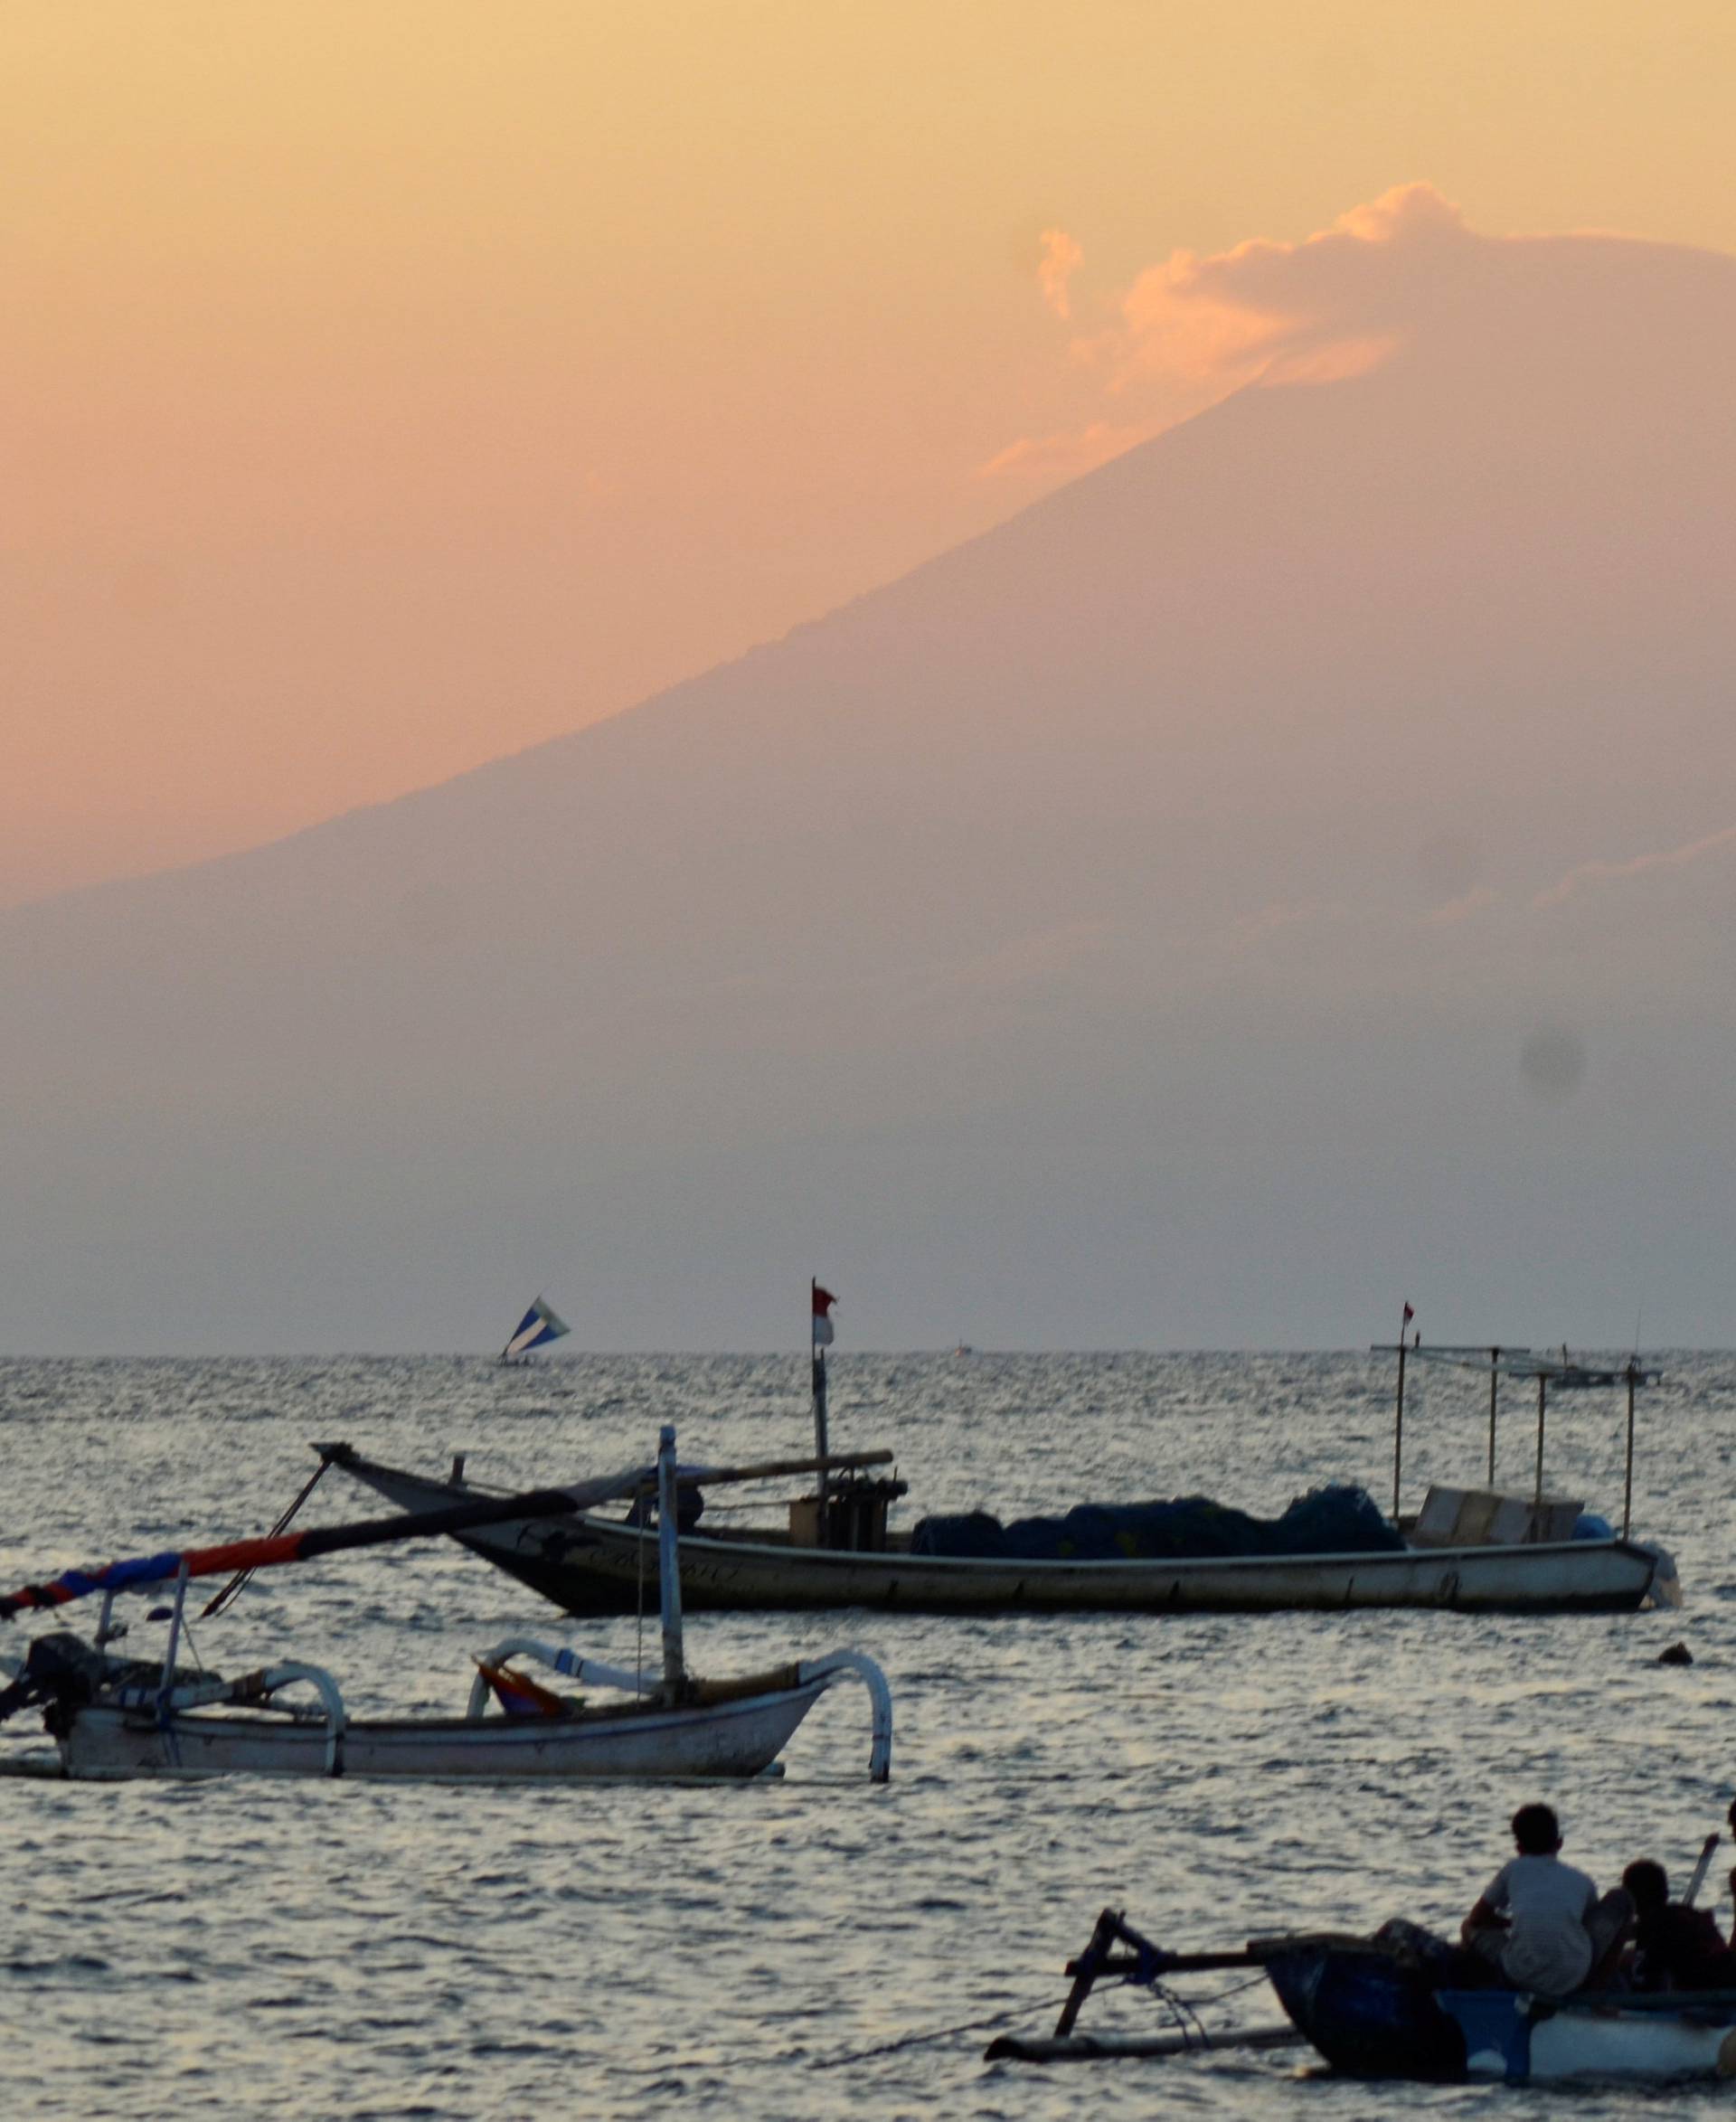 Mount Agung, an active volcano located on the resort island of Bali that has been placed on alert level 3 following recent seismic activity, is seen from Mataram on nearby Lombok island